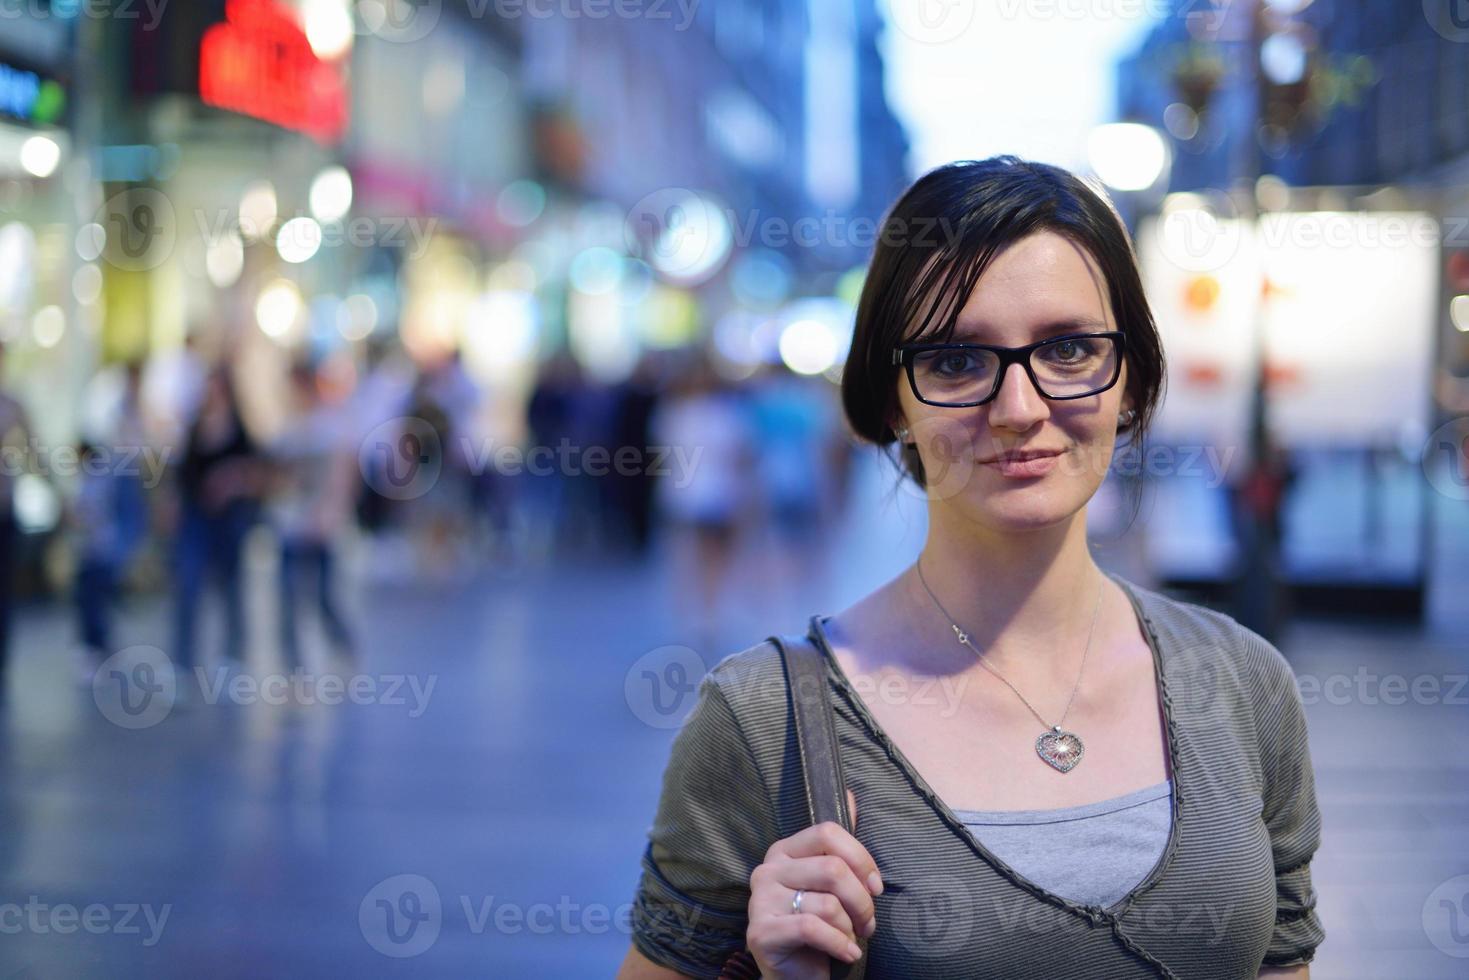 woman portrait at night in city photo